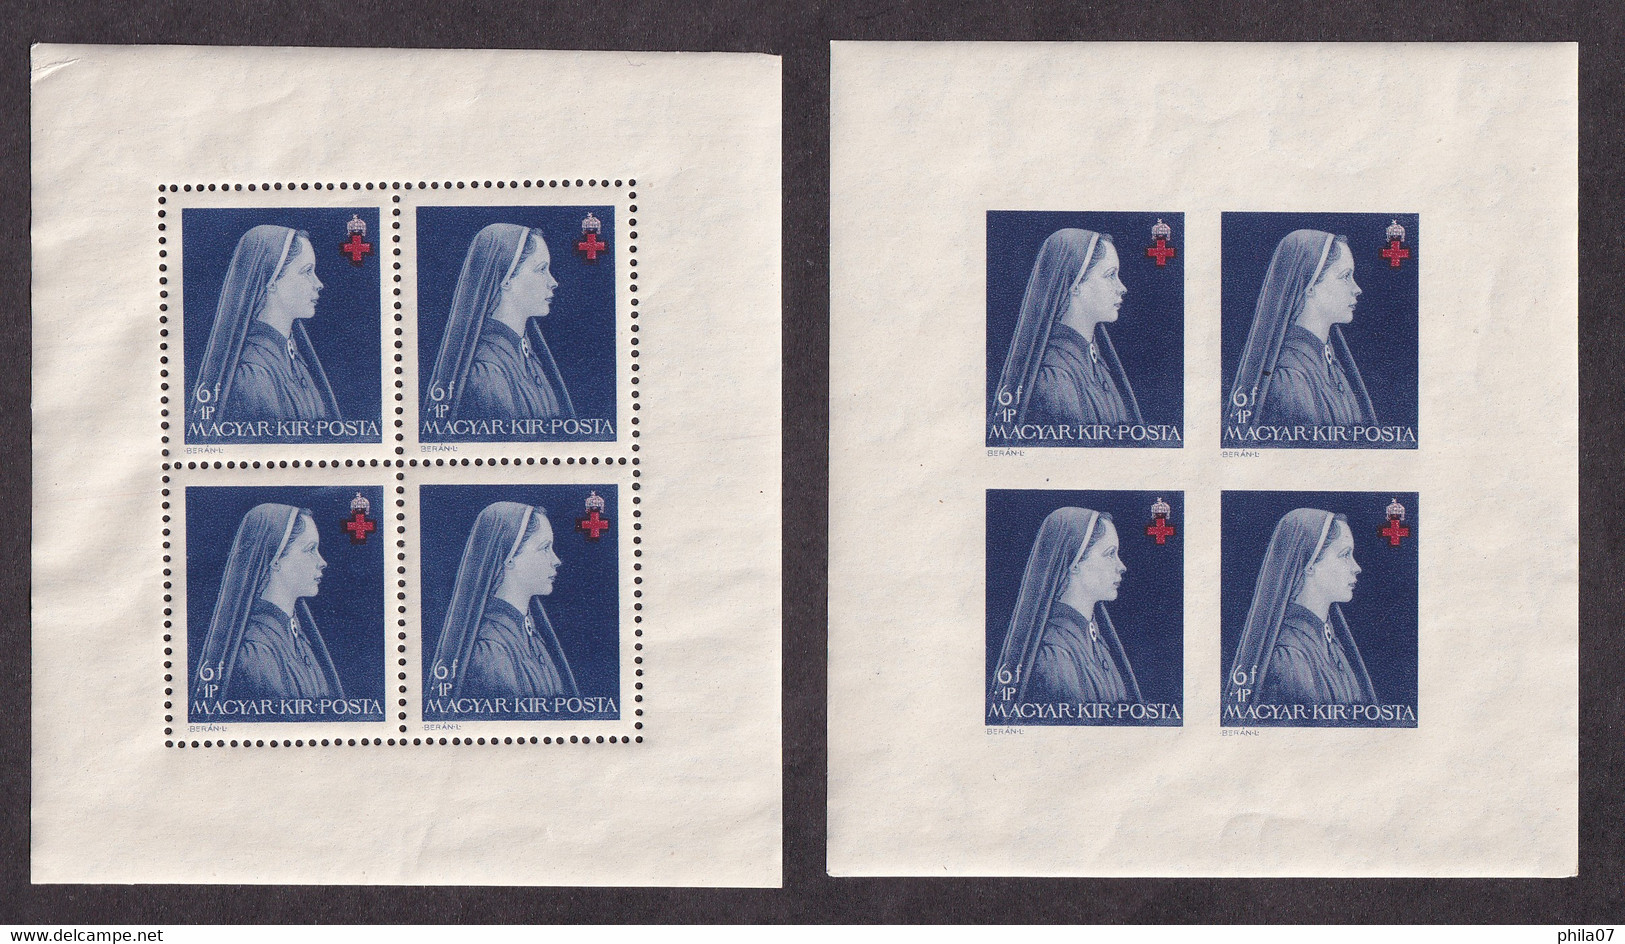 HUNGARY 1942 - Red Cross, Mi.No. 696/698, perforate and imperforate sheets, MNH, some of sheets have trace of being in a